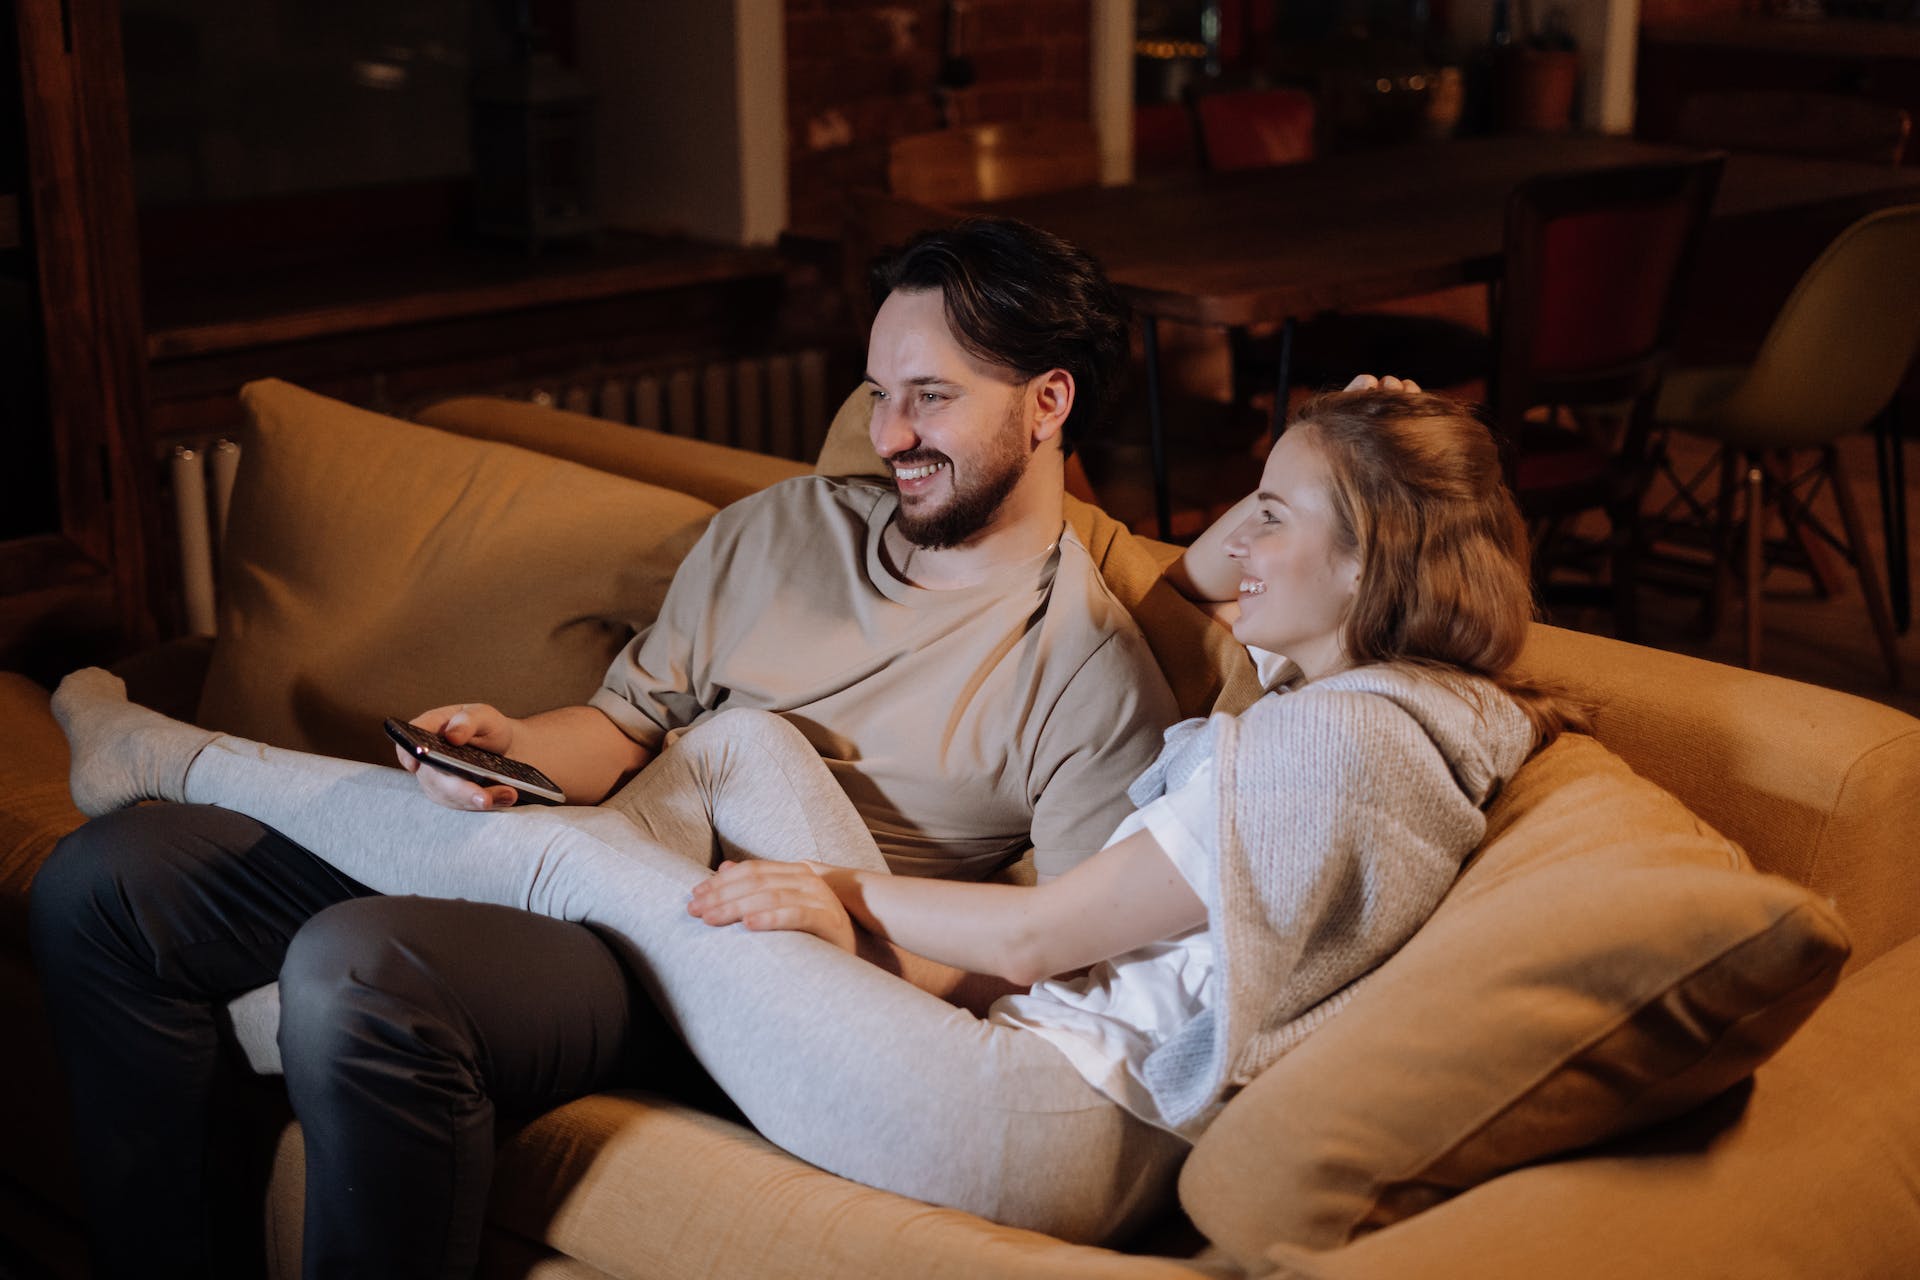 A couple sitting on a couch| Source: Pexels